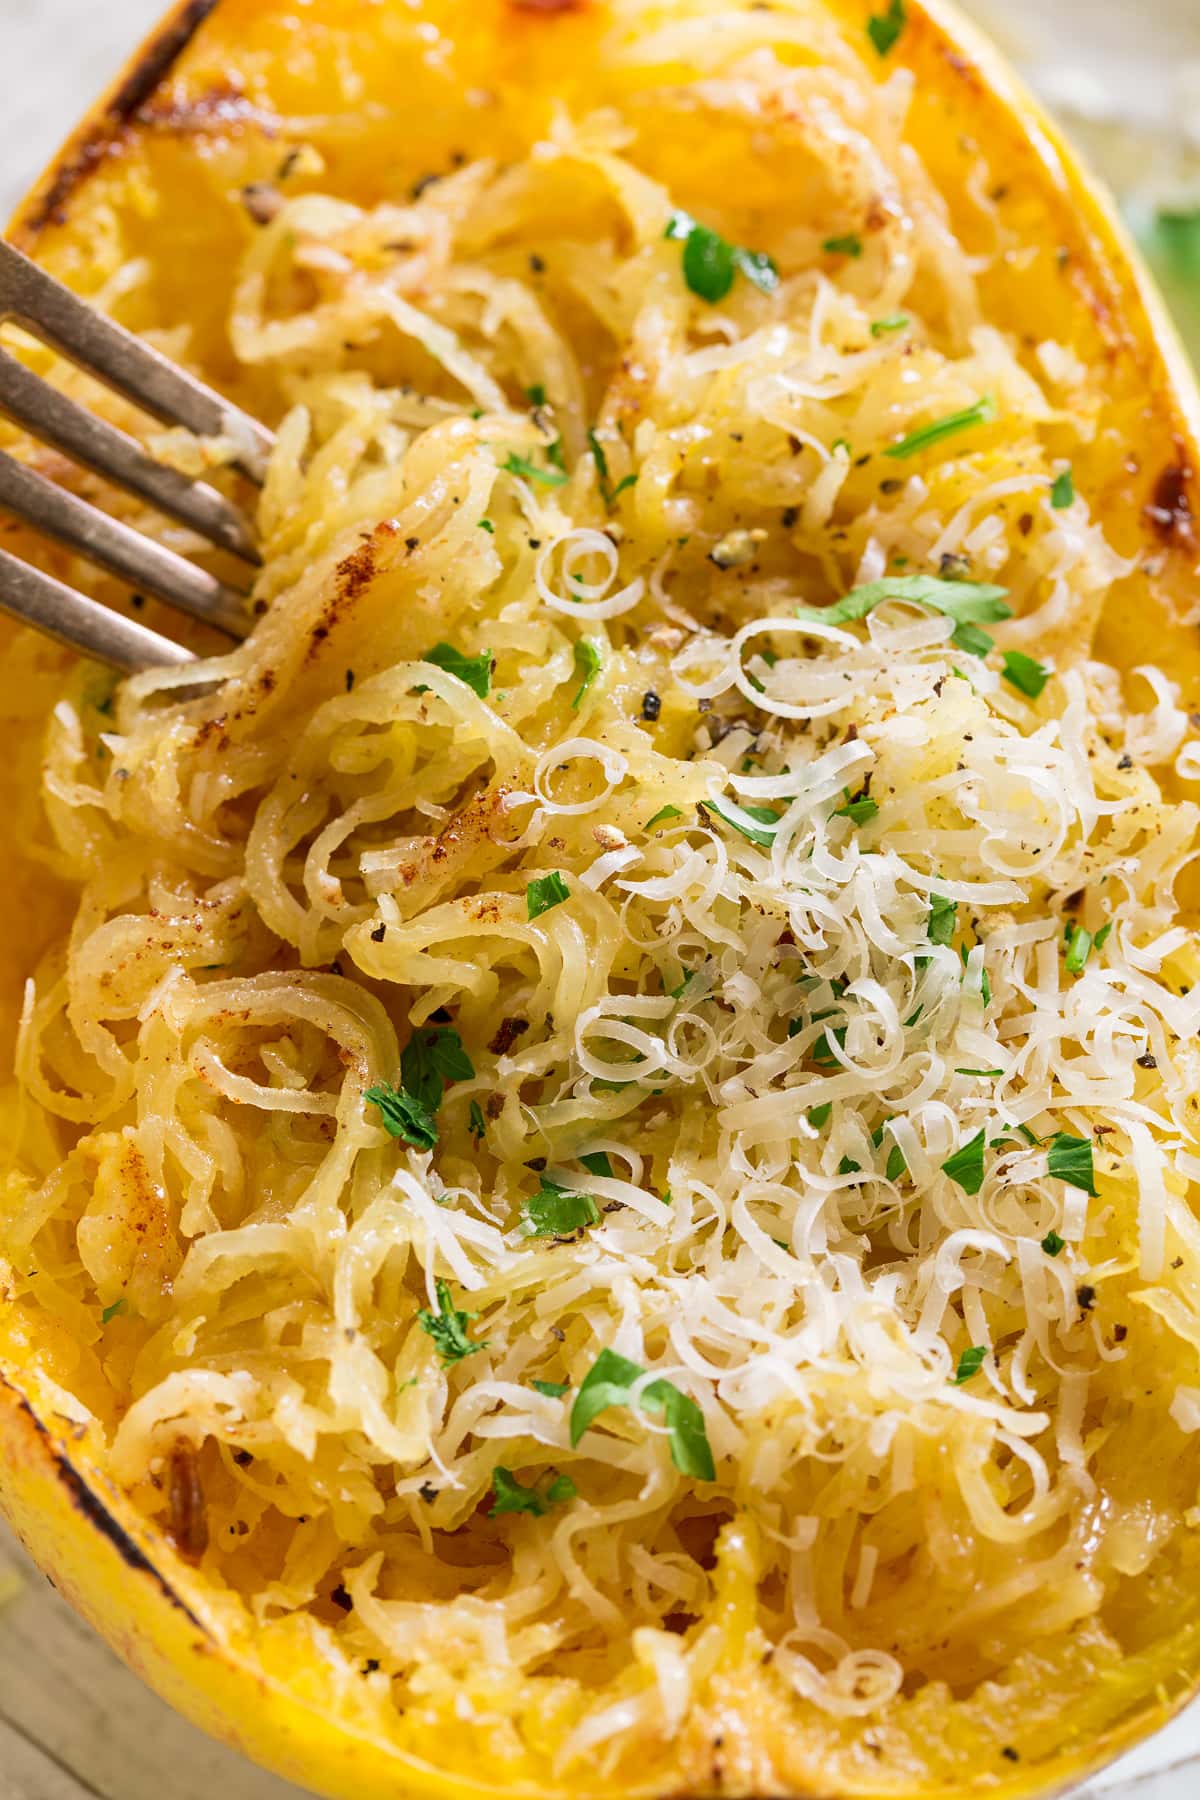 Close up image of roasted spaghetti squash shredded into strings, topped with browned butter and parmesan.